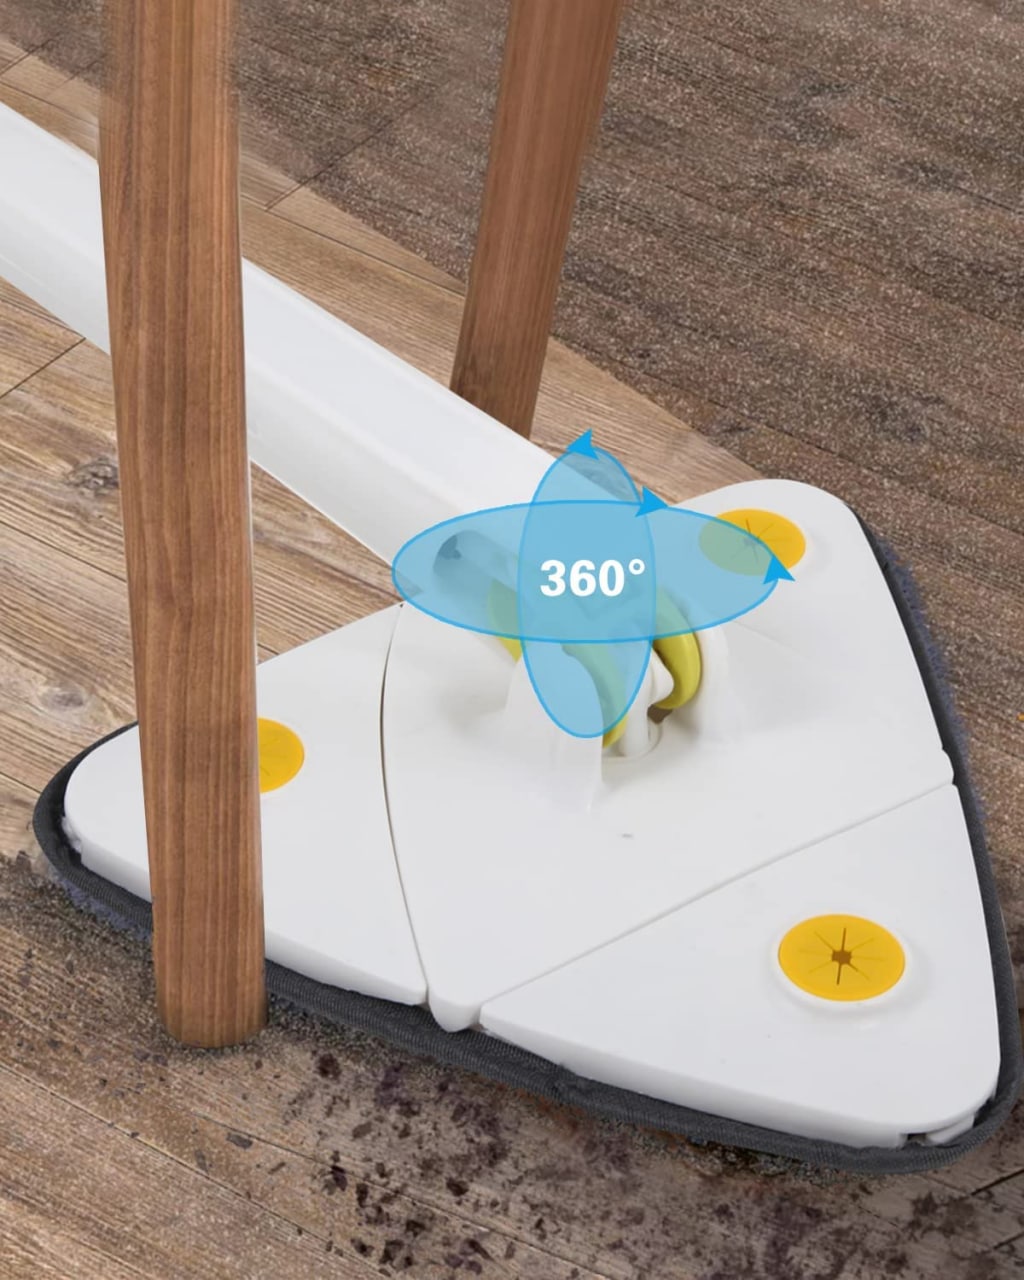 360° Rotatable Adjustable Cleaning Mop - thedealzninja